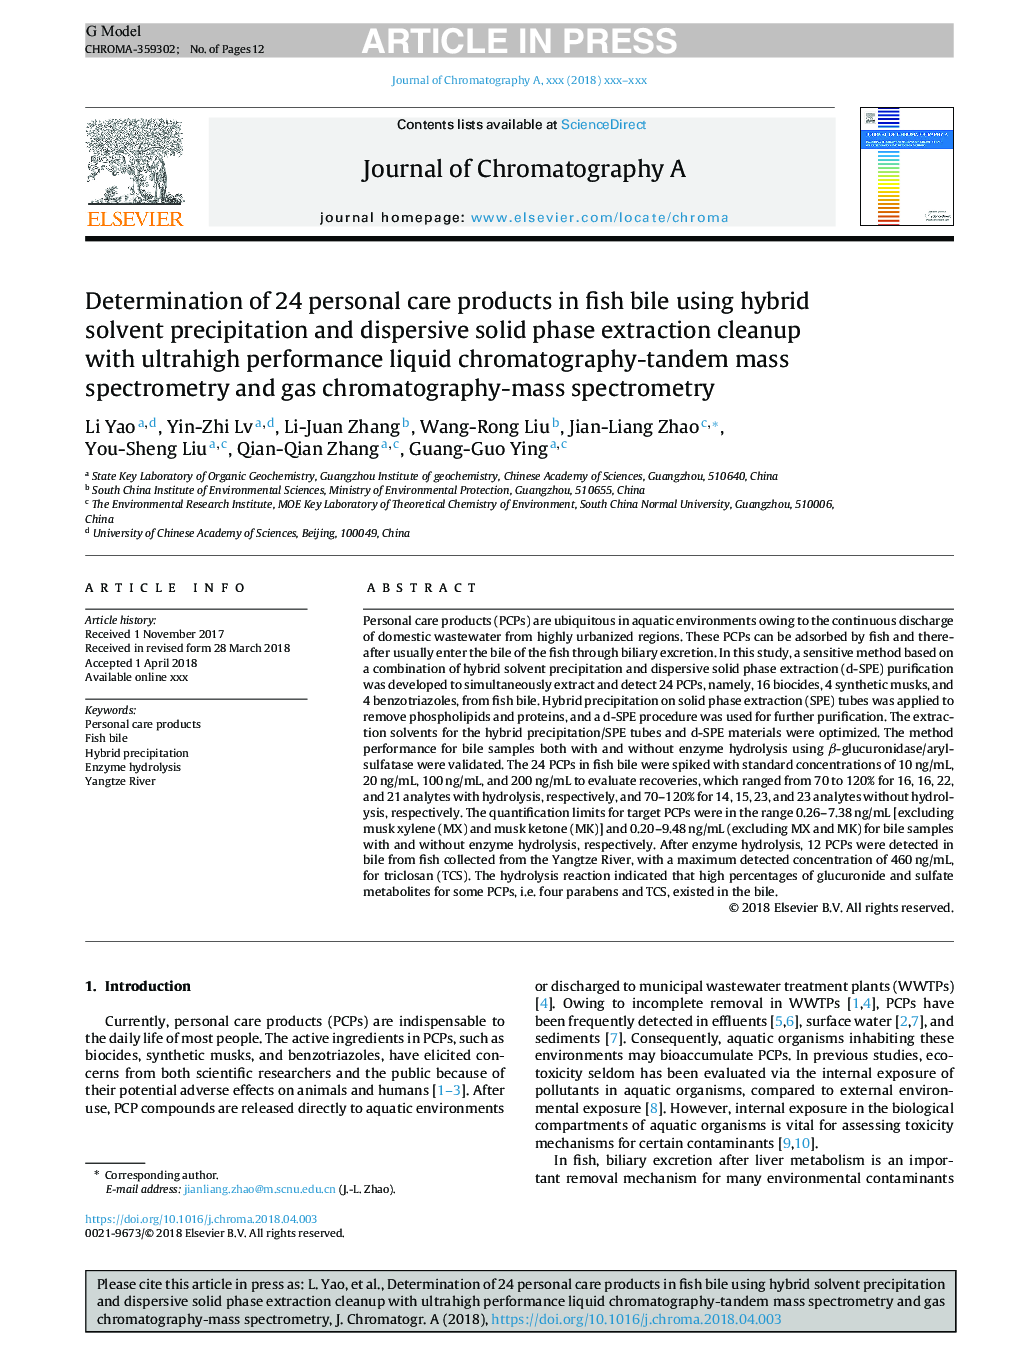 Determination of 24 personal care products in fish bile using hybrid solvent precipitation and dispersive solid phase extraction cleanup with ultrahigh performance liquid chromatography-tandem mass spectrometry and gas chromatography-mass spectrometry